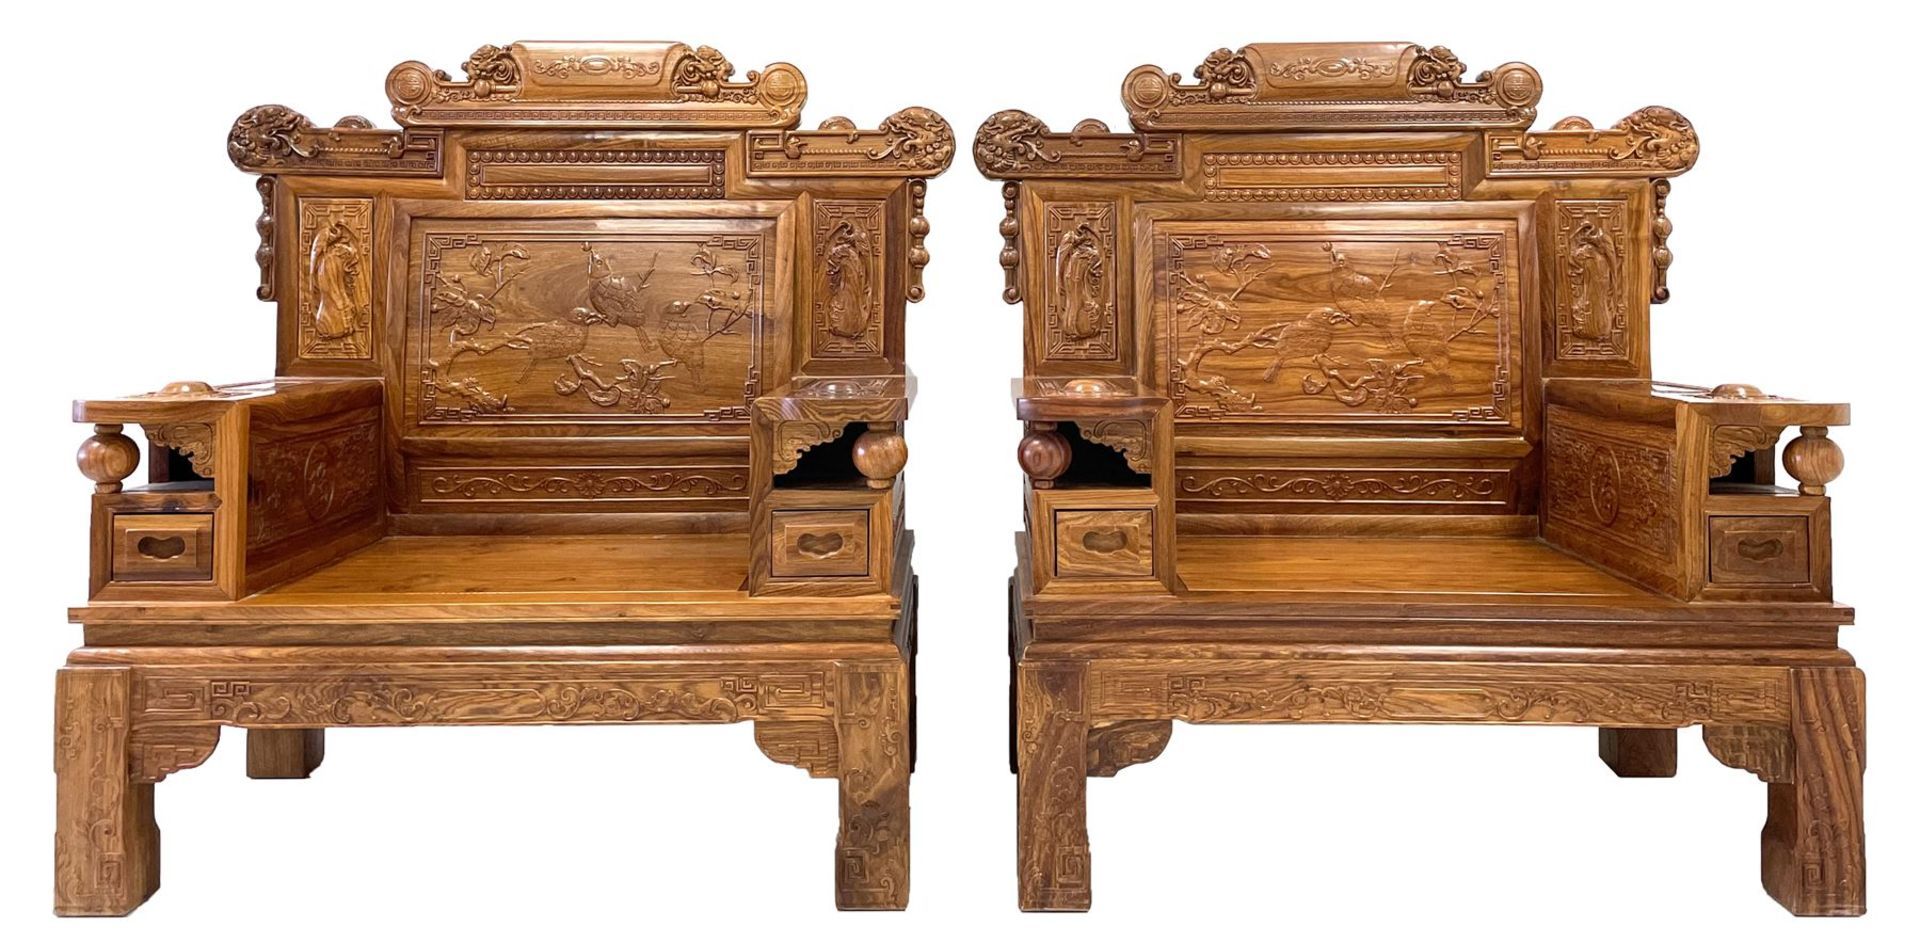 A Pair Chinese Imperial Style Hardwood Throne Chairs, The Backs Carved With Dragon Masks And Birds - Image 20 of 20